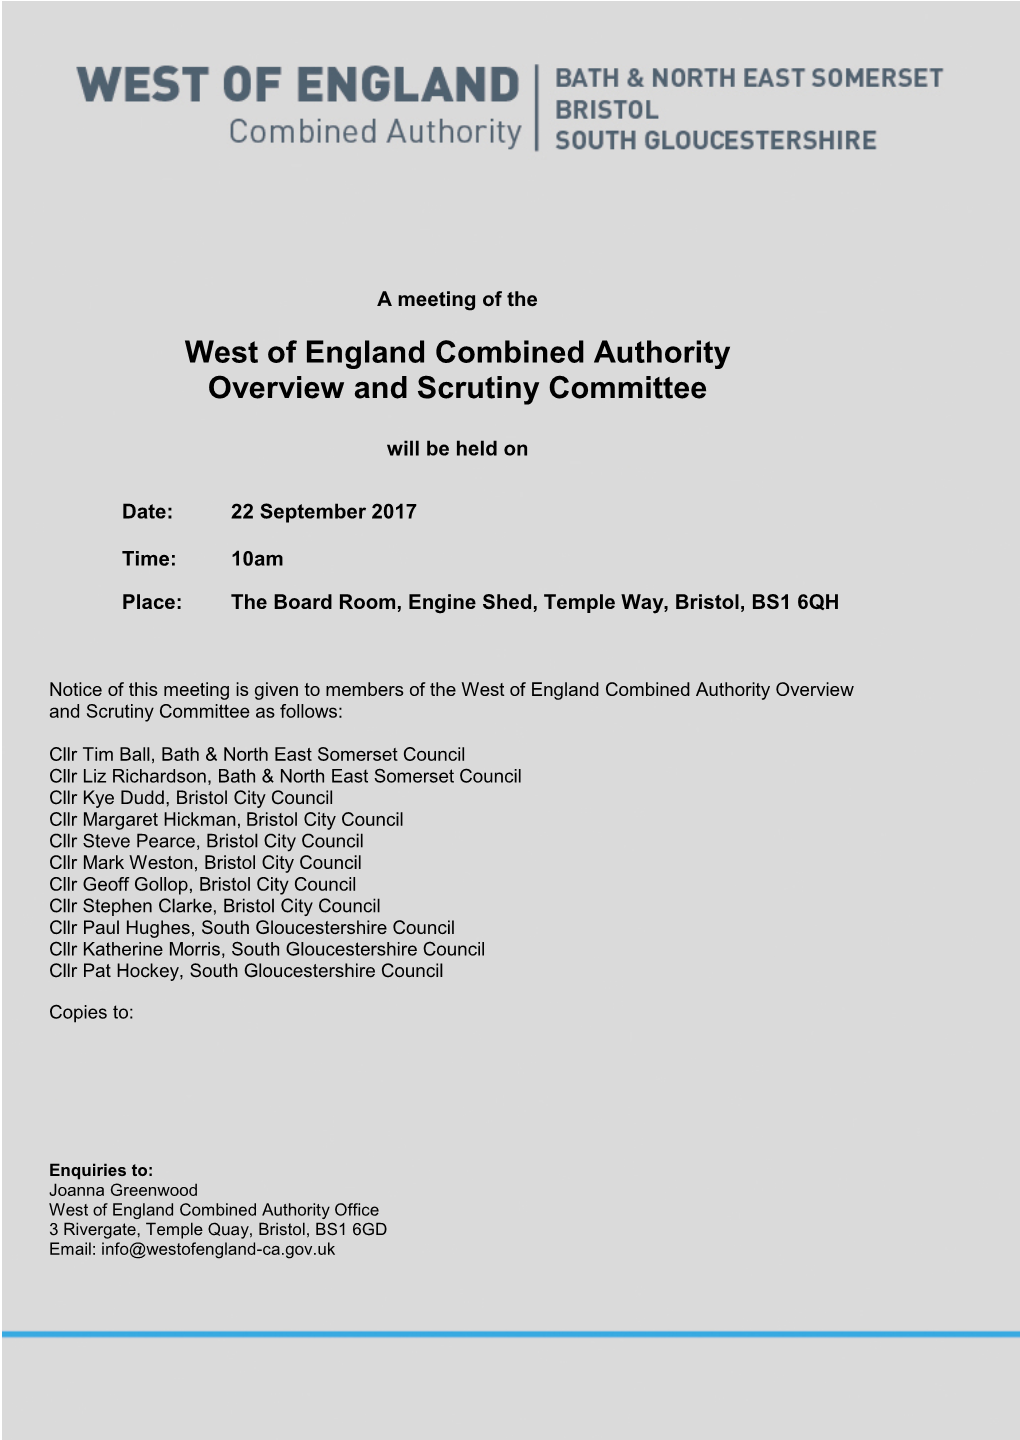 West of England Combined Authority Overview and Scrutiny Committee